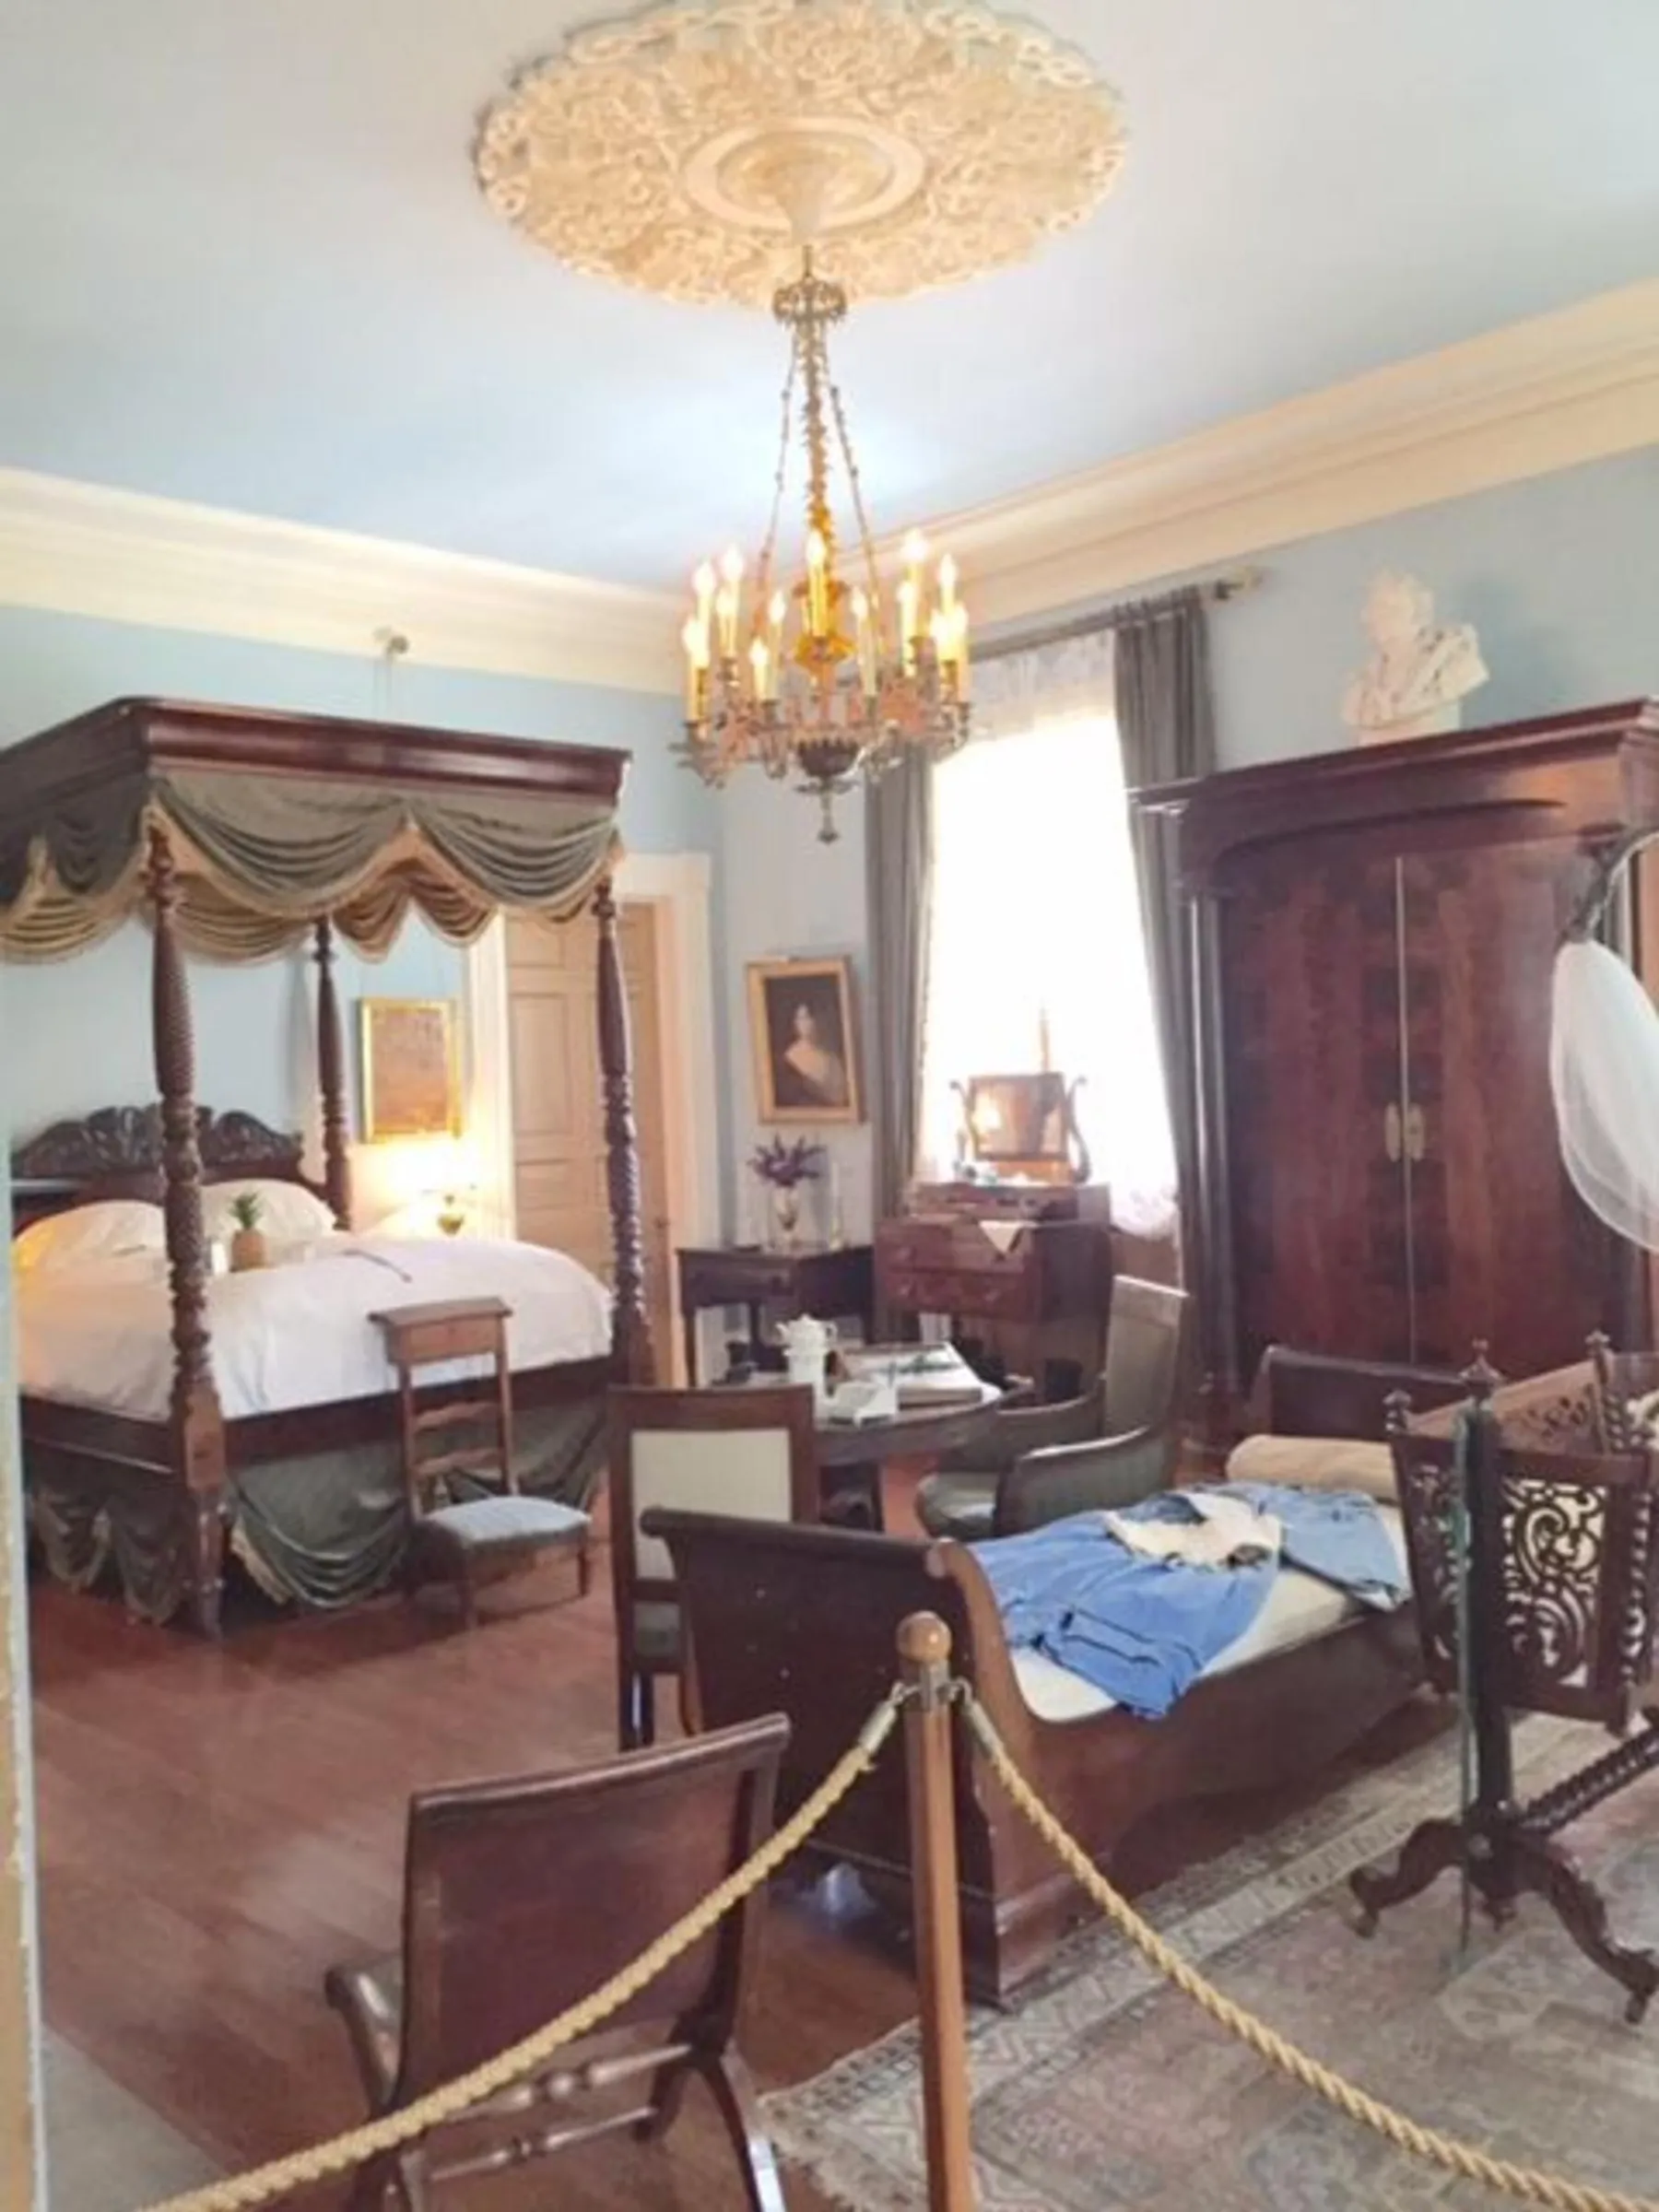 The image shows a Victorian-style bedroom with antique furniture, ornate decorations, and is cordoned off, suggesting it might be part of a museum or historic home tour.